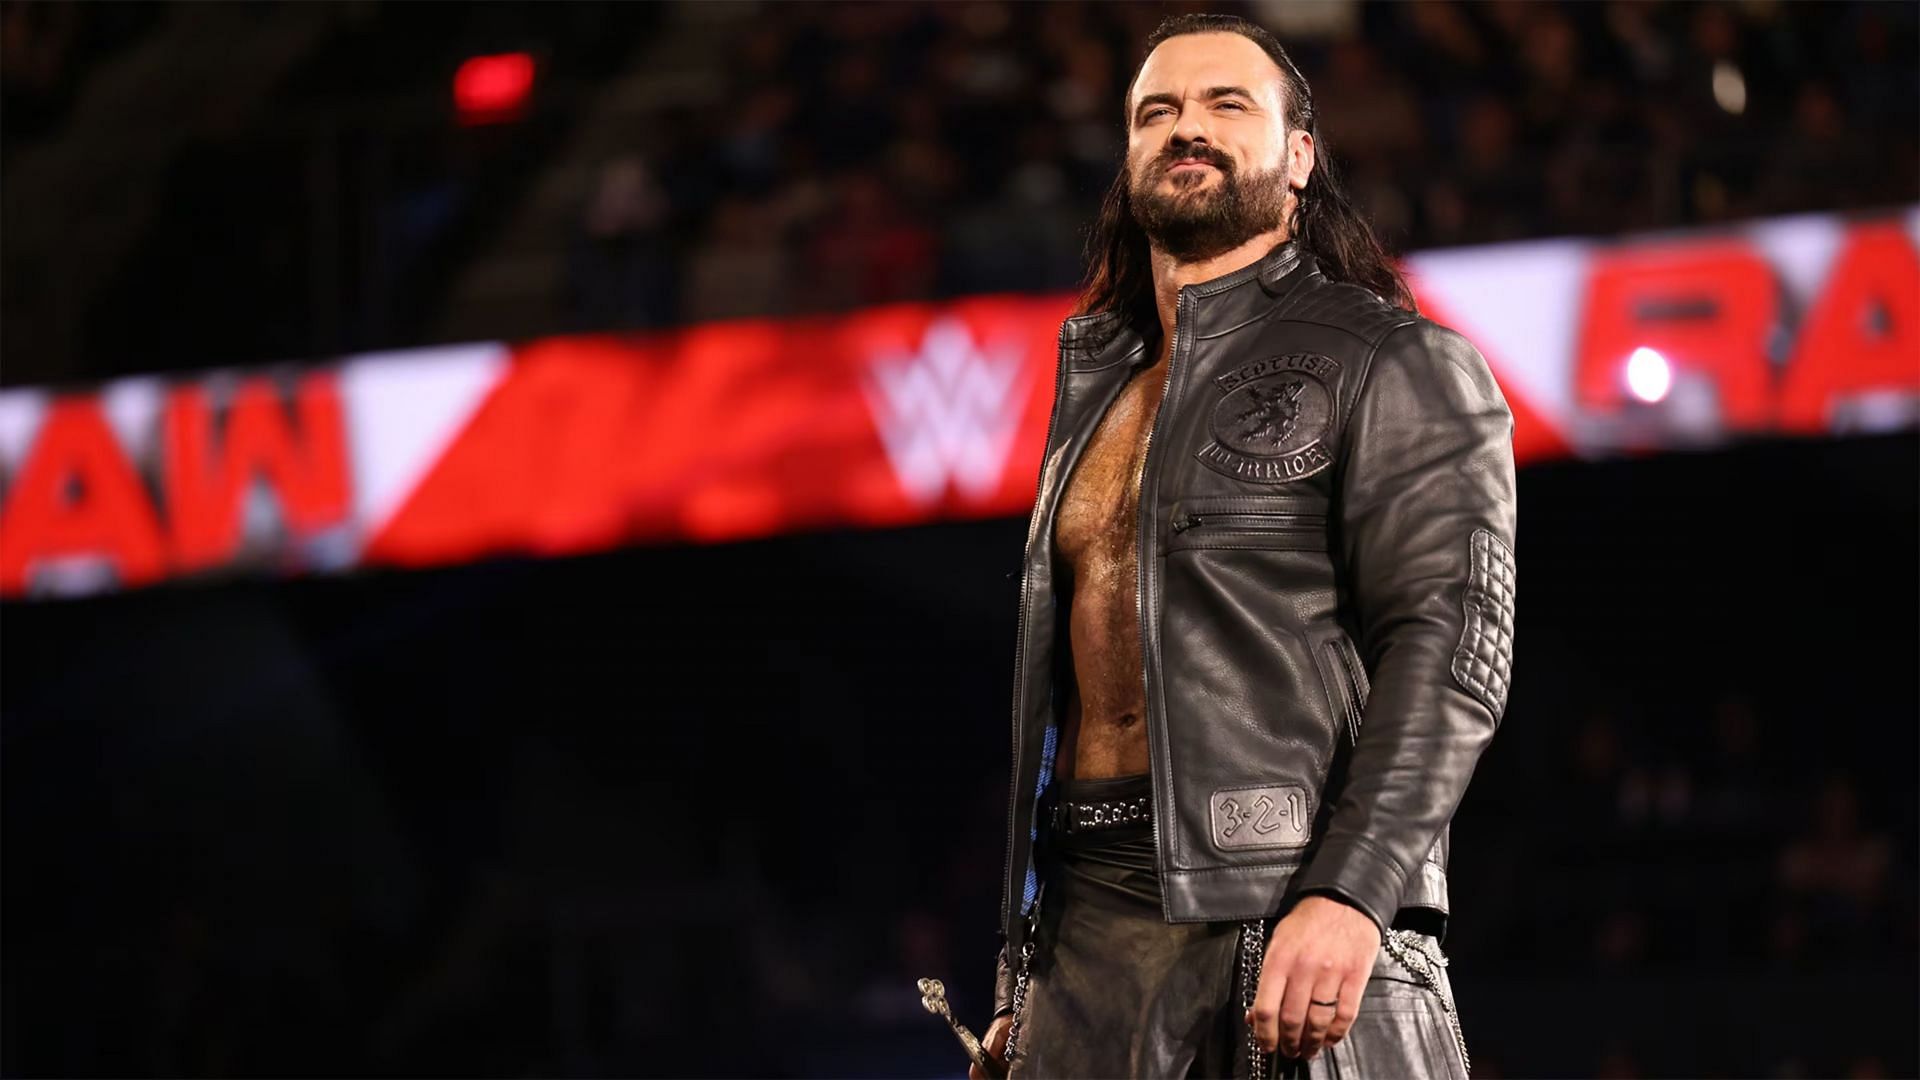 Drew McIntyre is the number-one contender for the WWE World Heavyweight Championship